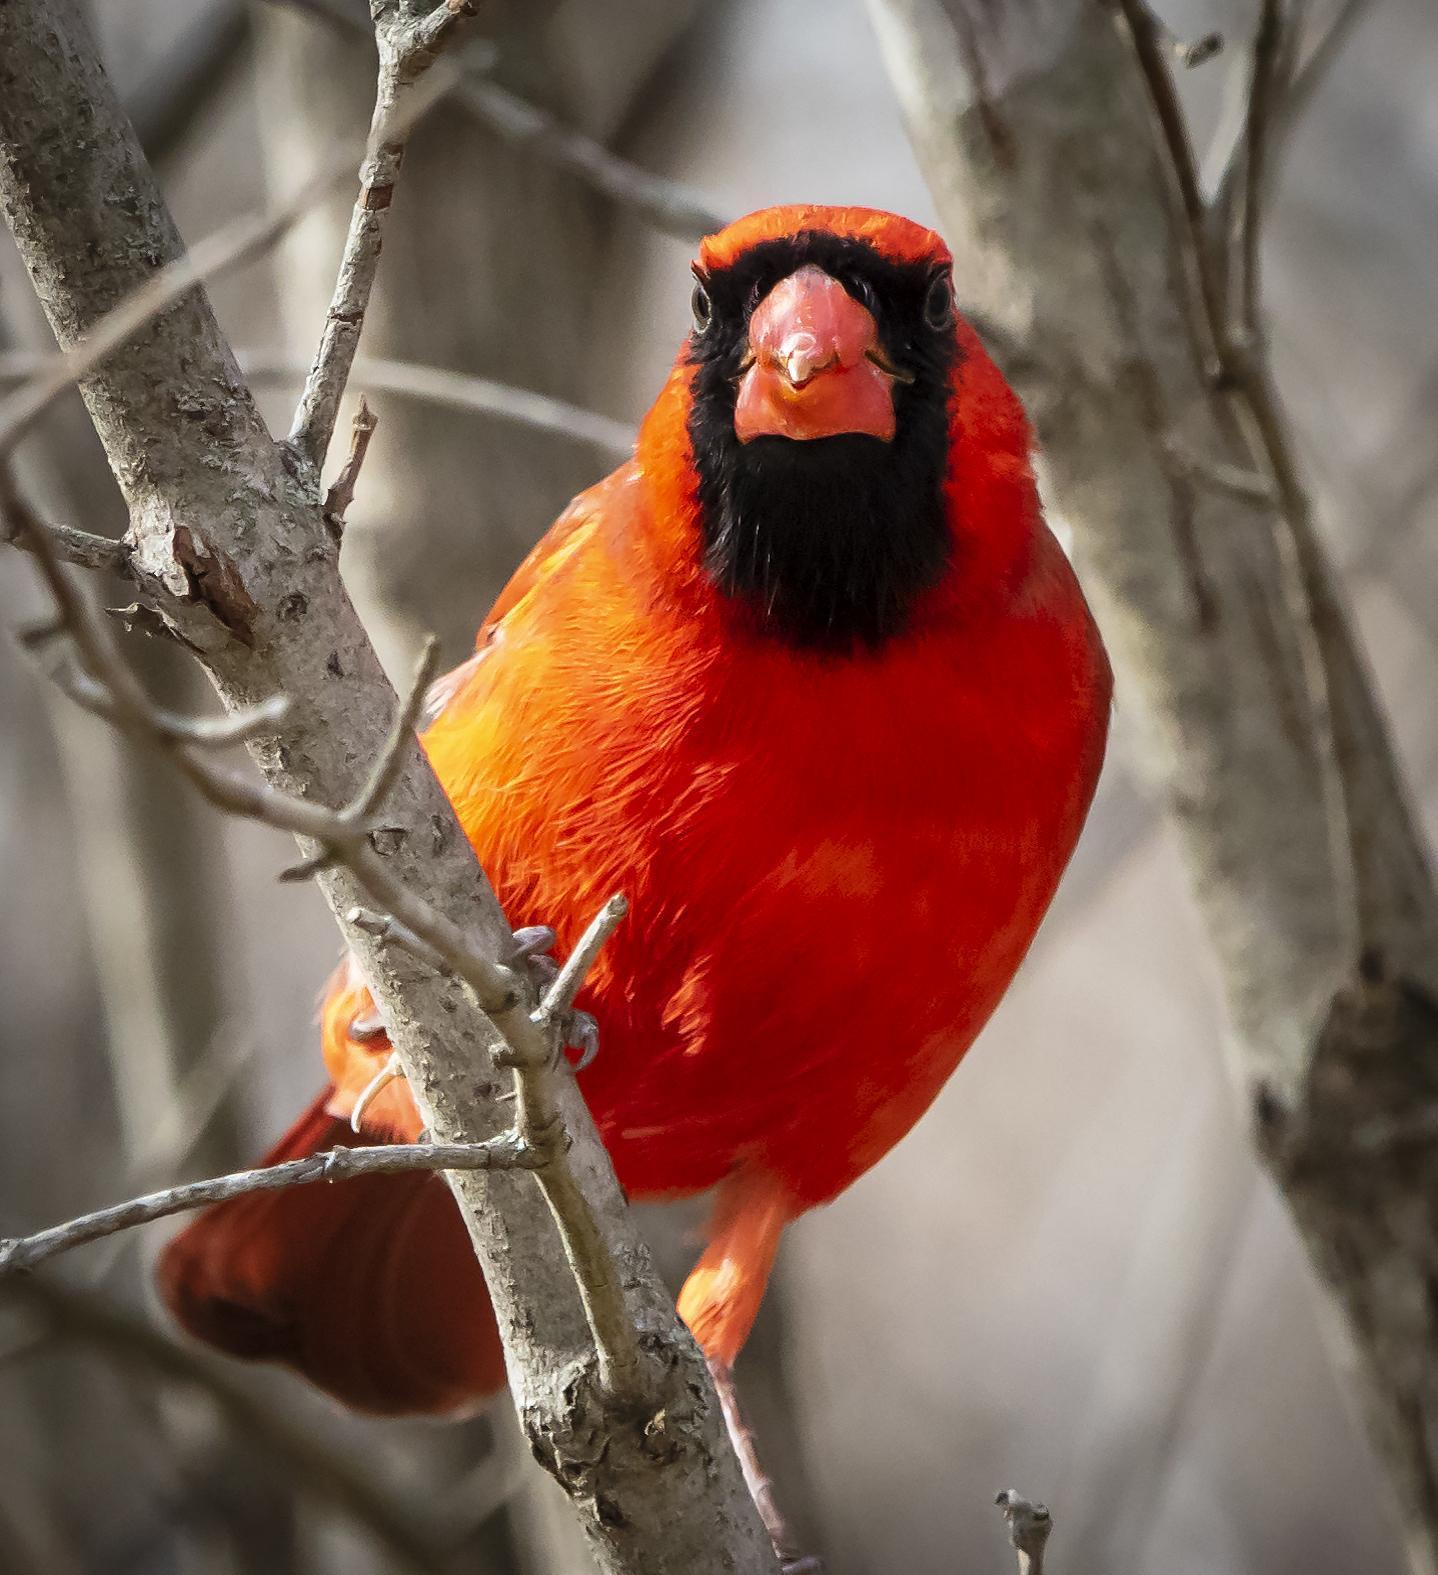 Northern Cardinal Photo by Tom Gannon